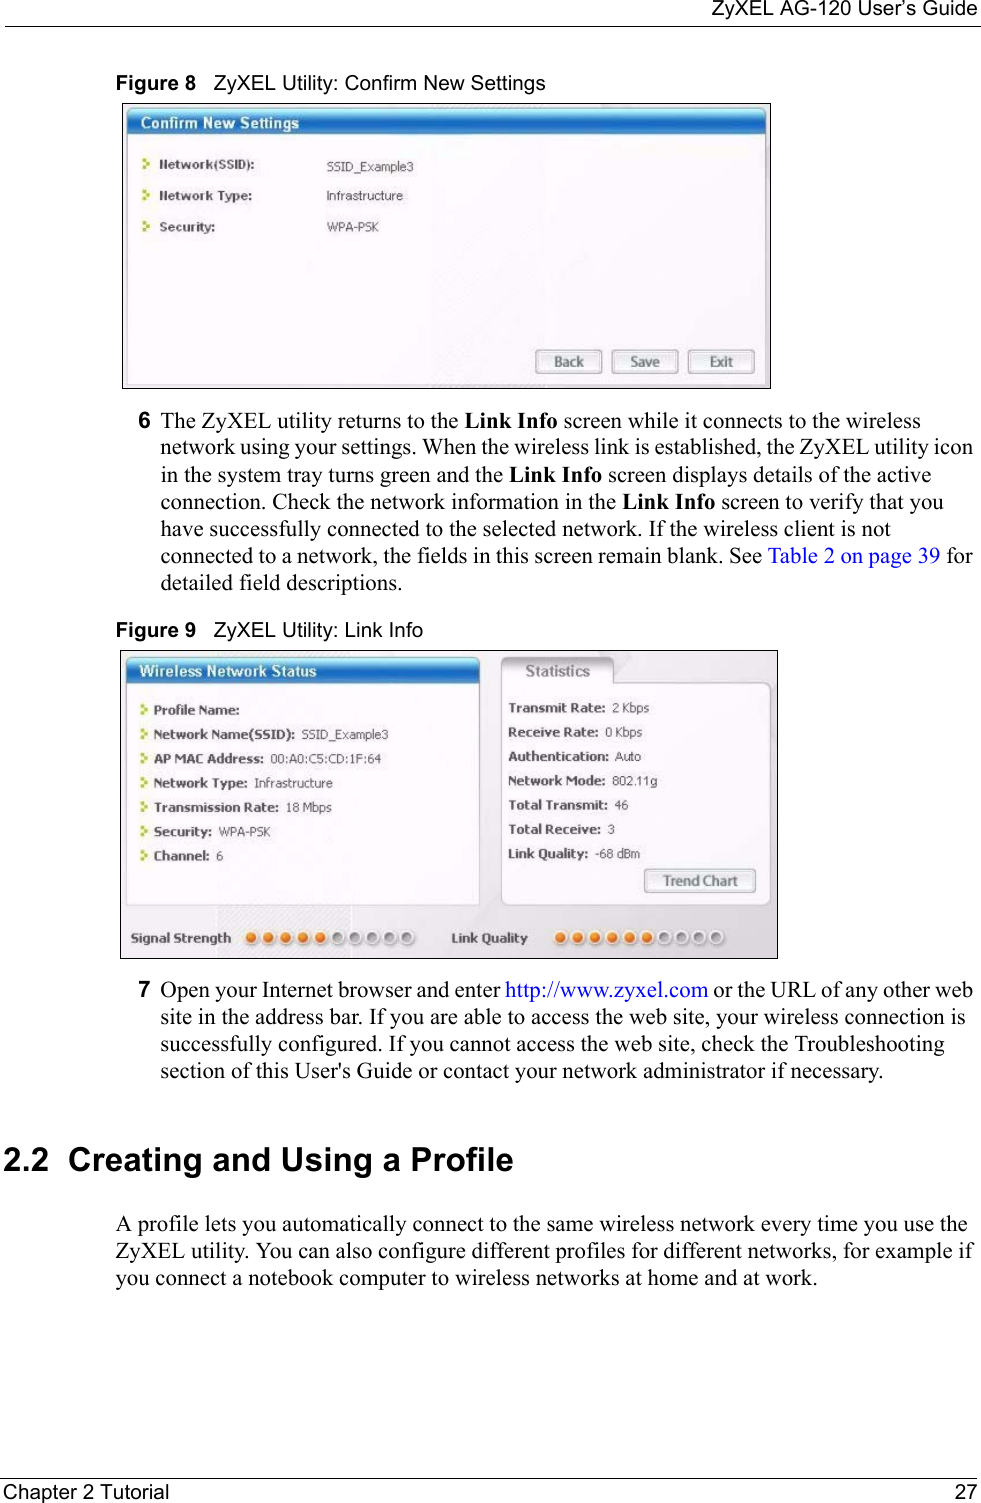 ZyXEL AG-120 User’s GuideChapter 2 Tutorial 27Figure 8   ZyXEL Utility: Confirm New Settings 6The ZyXEL utility returns to the Link Info screen while it connects to the wireless network using your settings. When the wireless link is established, the ZyXEL utility icon in the system tray turns green and the Link Info screen displays details of the active connection. Check the network information in the Link Info screen to verify that you have successfully connected to the selected network. If the wireless client is not connected to a network, the fields in this screen remain blank. See Table 2 on page 39 for detailed field descriptions.Figure 9   ZyXEL Utility: Link Info 7Open your Internet browser and enter http://www.zyxel.com or the URL of any other web site in the address bar. If you are able to access the web site, your wireless connection is successfully configured. If you cannot access the web site, check the Troubleshooting section of this User&apos;s Guide or contact your network administrator if necessary.2.2  Creating and Using a ProfileA profile lets you automatically connect to the same wireless network every time you use the ZyXEL utility. You can also configure different profiles for different networks, for example if you connect a notebook computer to wireless networks at home and at work.